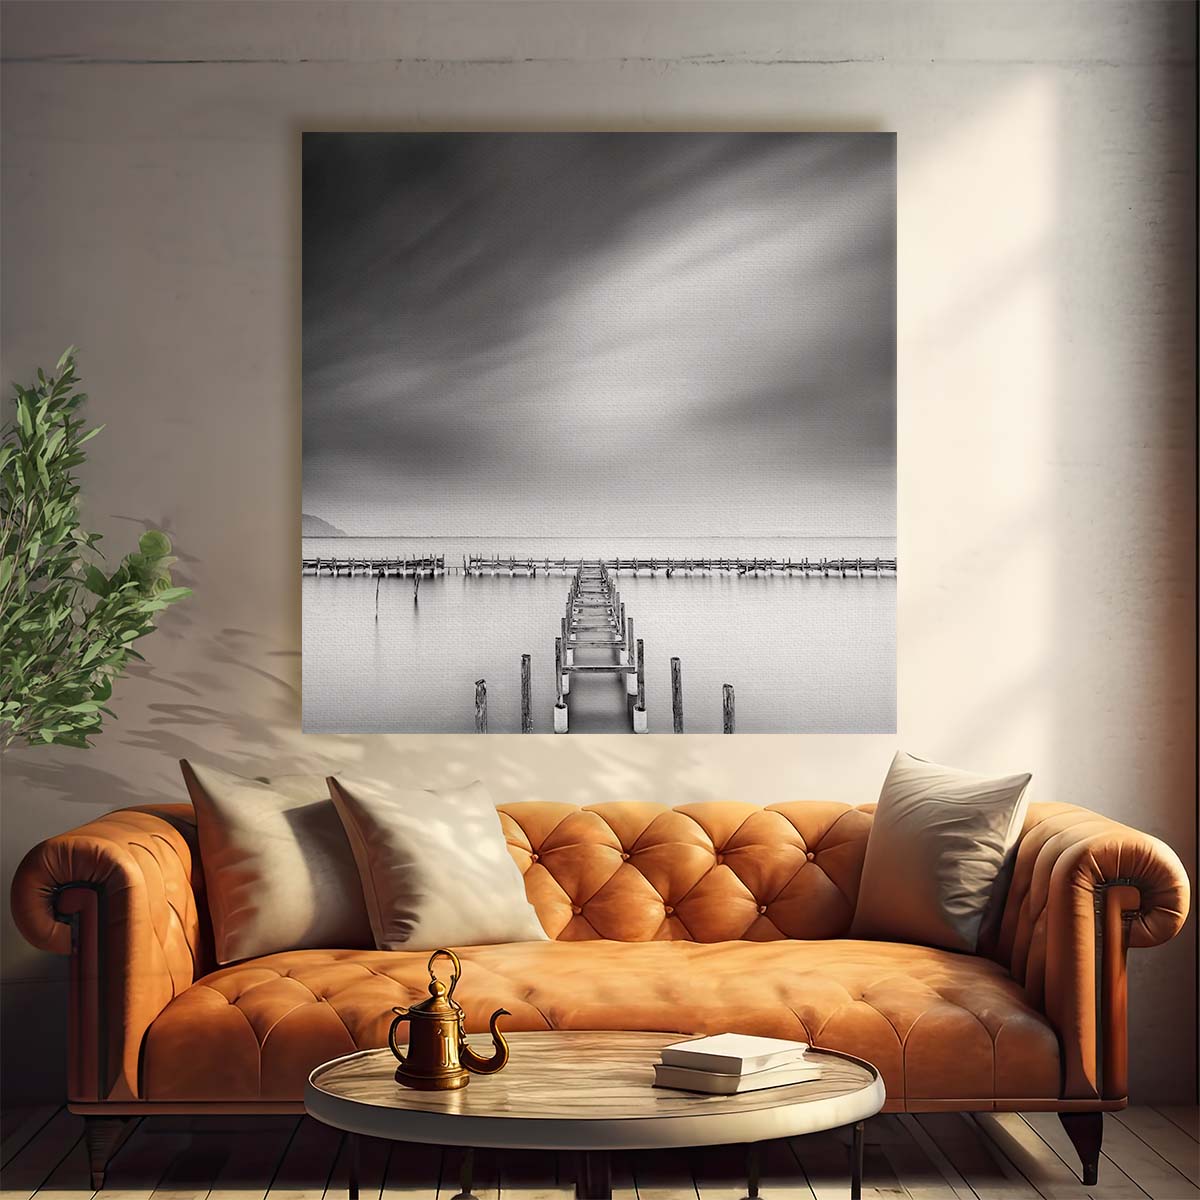 Tranquil Ocean Pier Long Exposure Seascape Photography Wall Art by Luxuriance Designs. Made in USA.